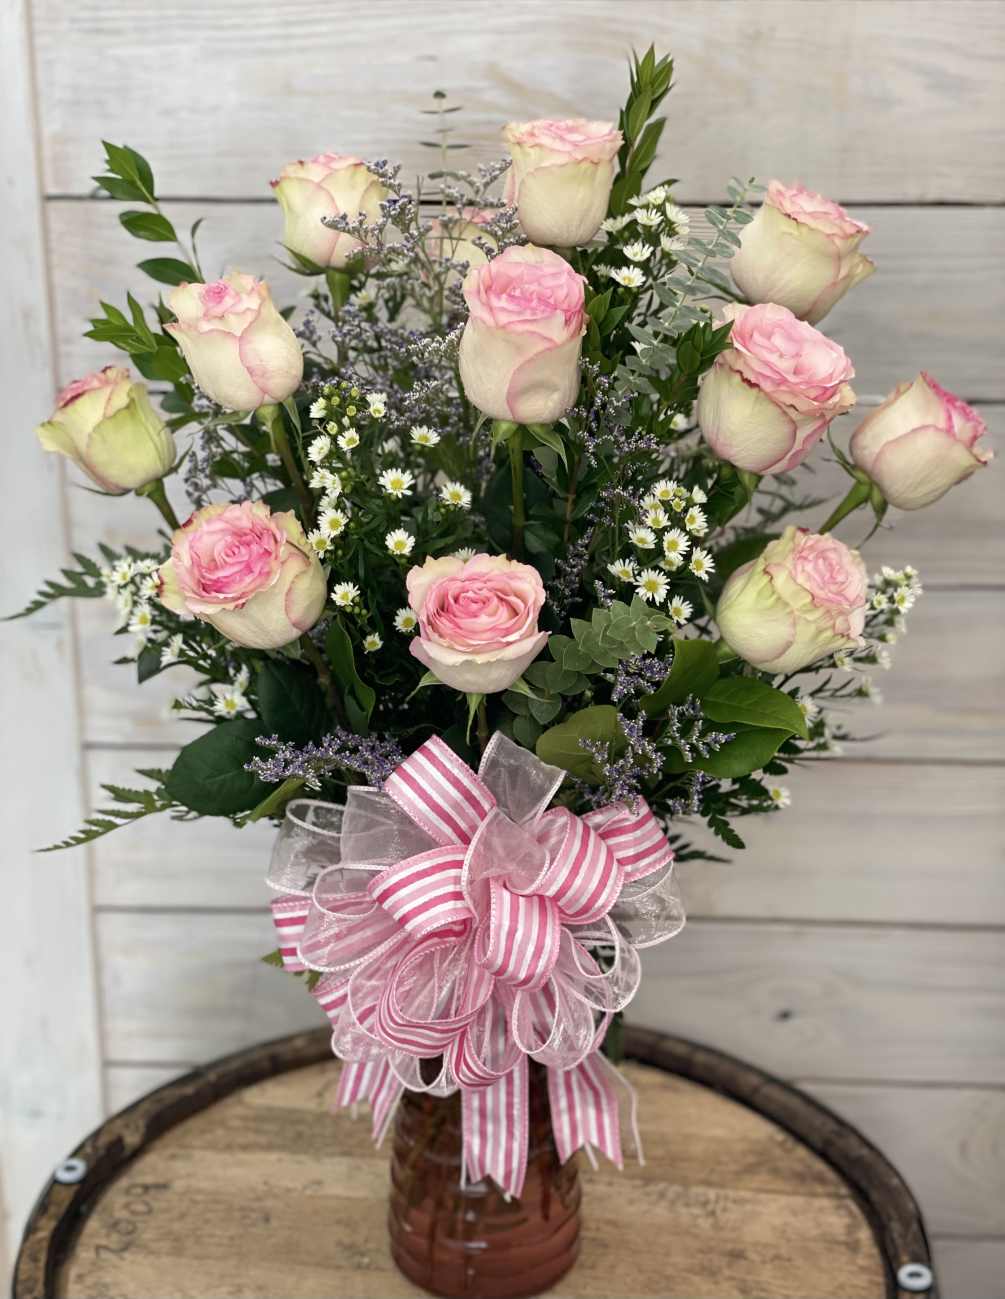 A dozen pink roses arranged in a vase with filler flowers and